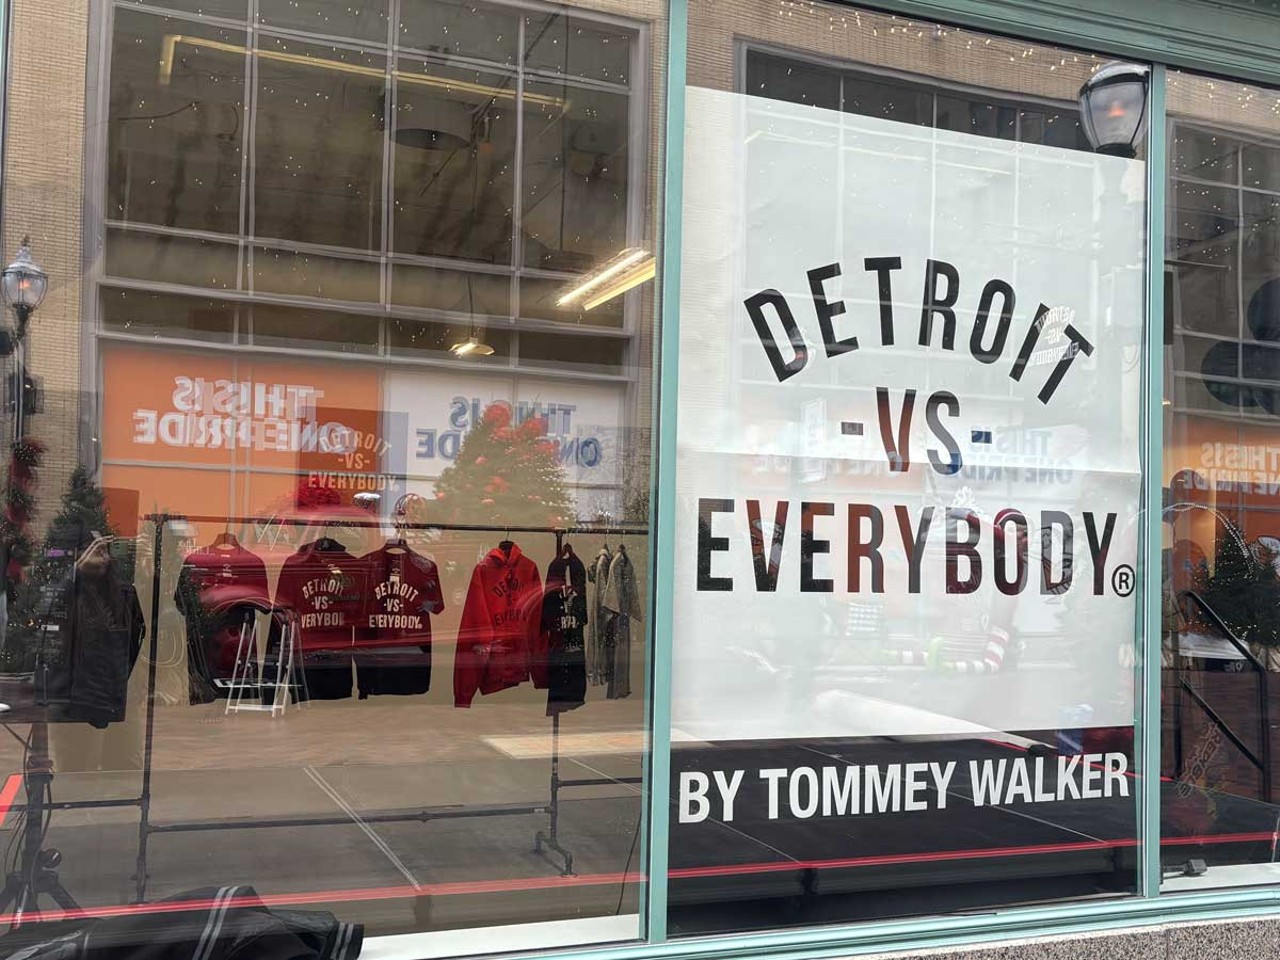 Detroit vs. Everybody
Originating as a clothing brand in 2012 created by Tommey Walker, “Detroit vs. Everybody” has since gained global recognition. The phrase’s message of resilience and unity expanded its appeal, leading to it being adopted in various contexts worldwide. Inspired by Detroit, festivals, cities, and other communities now often put their own twist on the slogan.